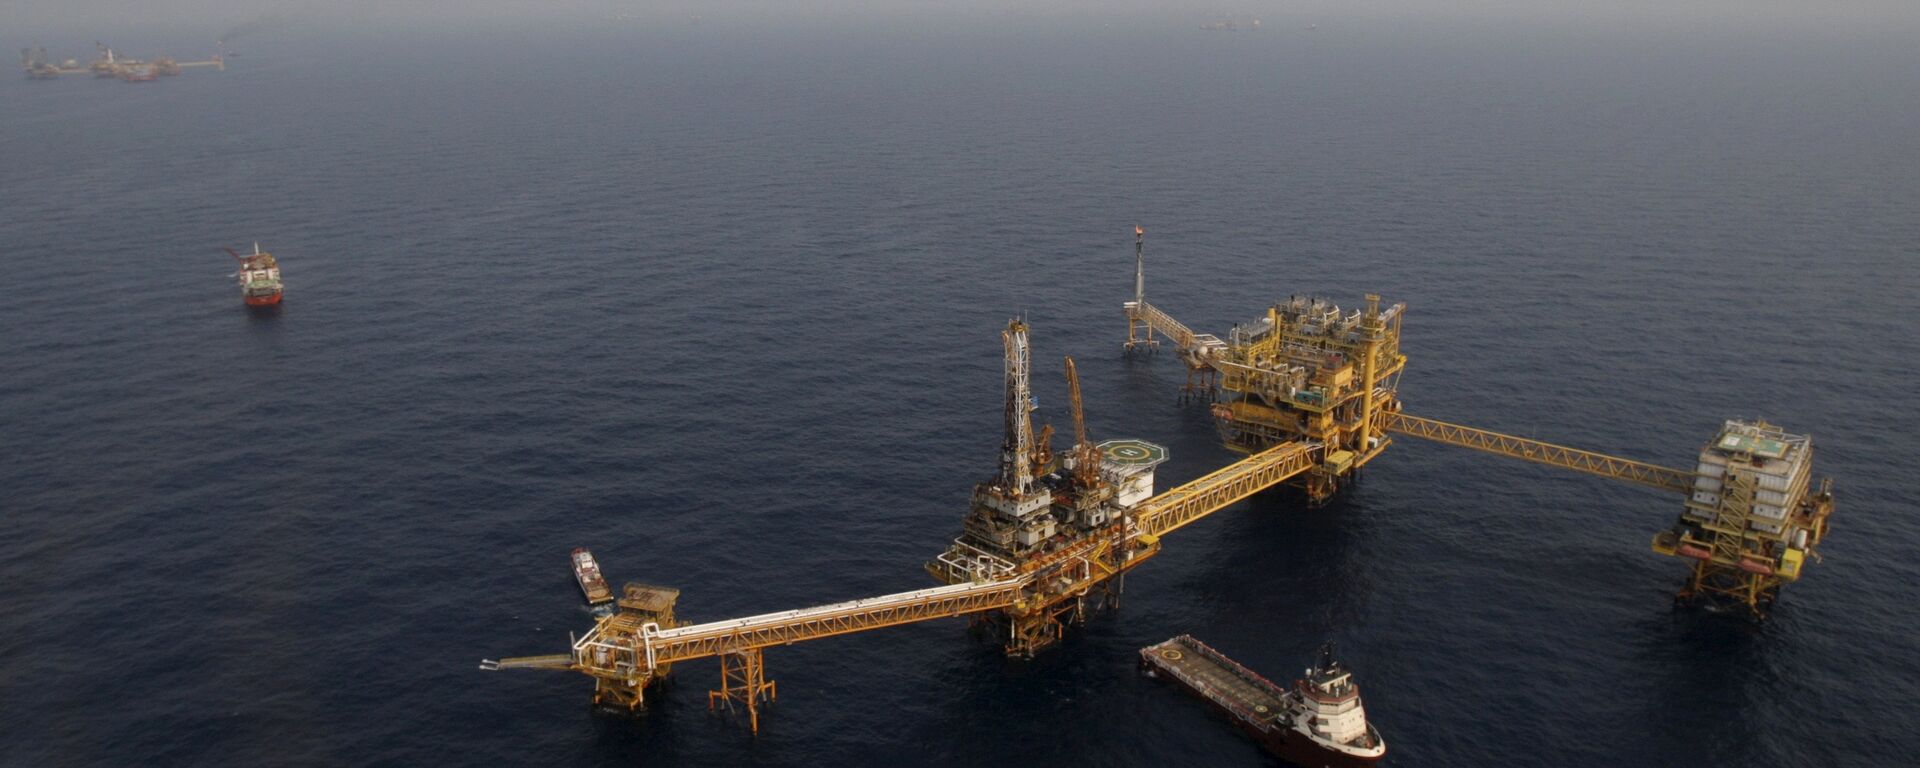 Mexico's state-run oil monopoly Pemex's platform Ku Maloob Zaap is seen in the Northeast Marine Region of Pemex Exploration and Production in the Bay of Campeche in this April 19, 2013 file photo - Sputnik International, 1920, 27.10.2020